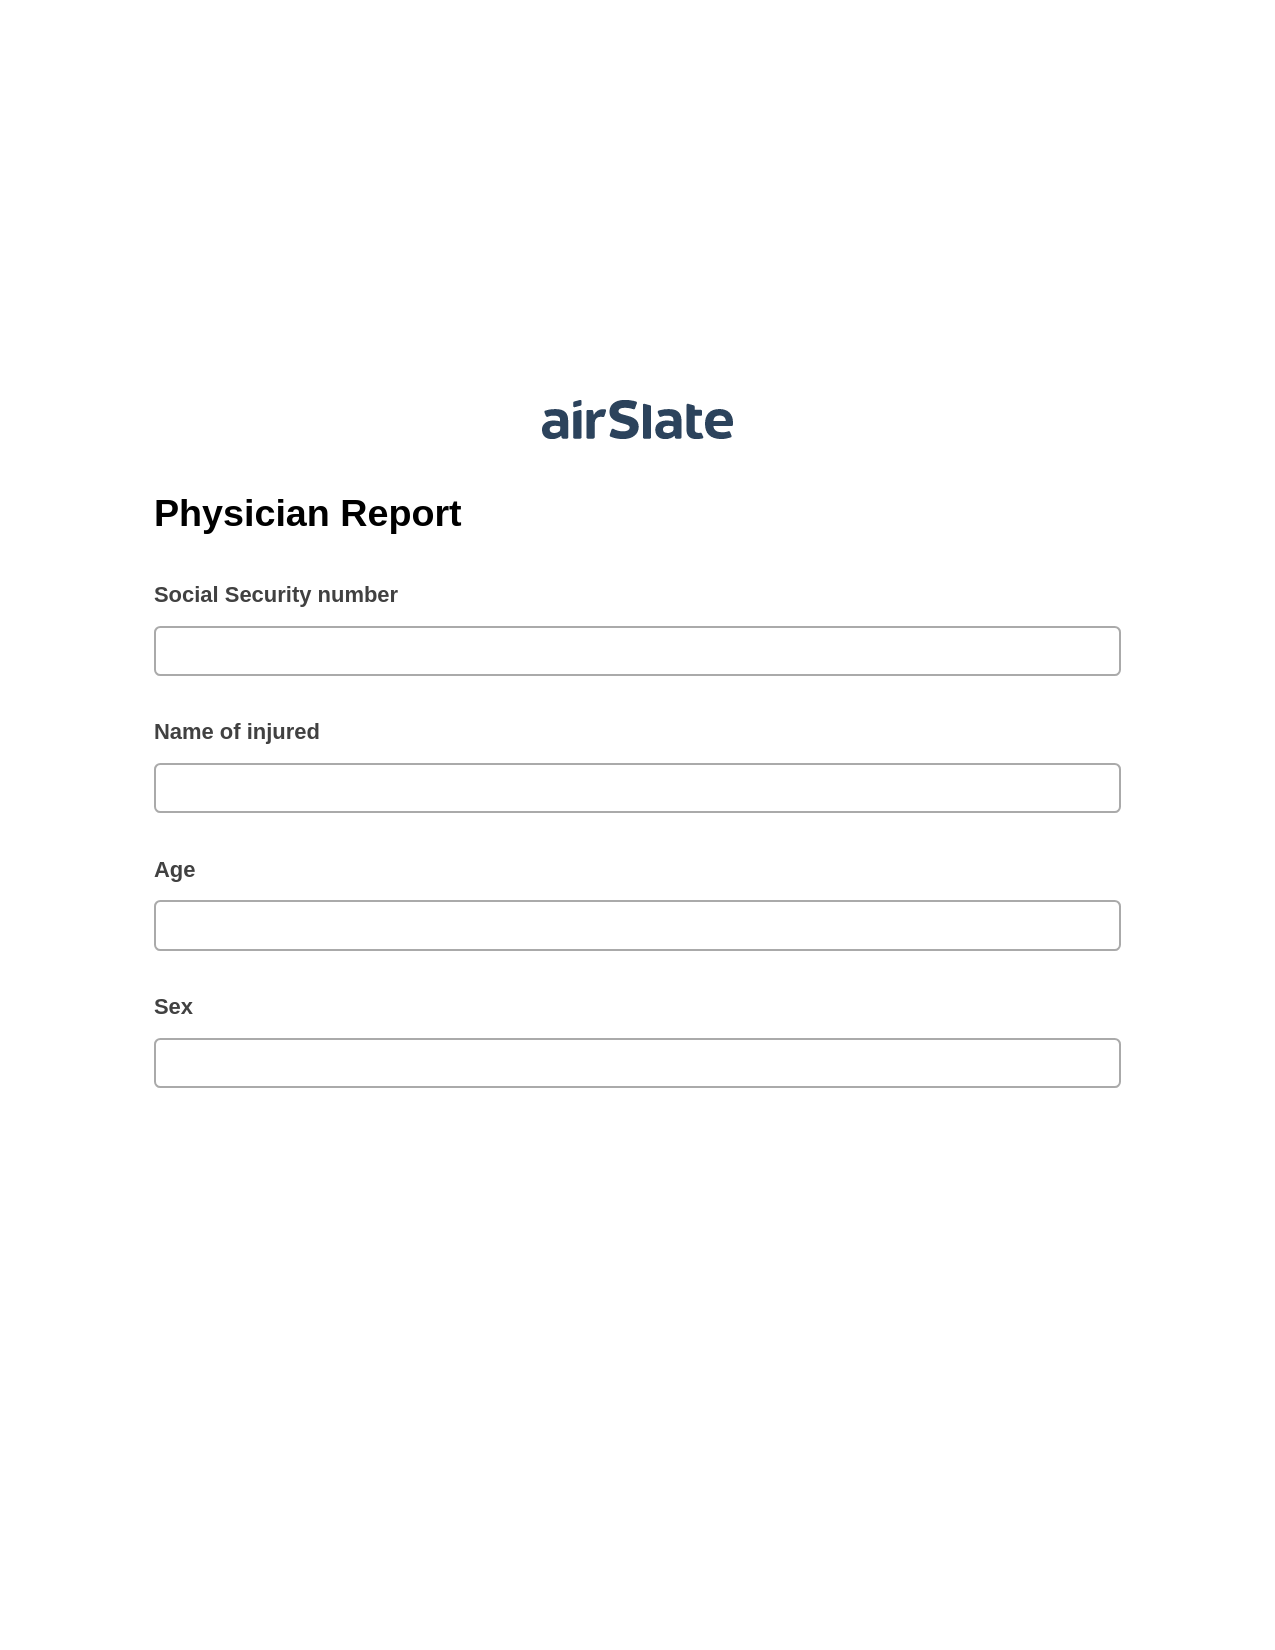 Physician Report Pre-fill from CSV File Bot, Google Cloud Print Bot, Export to Excel 365 Bot